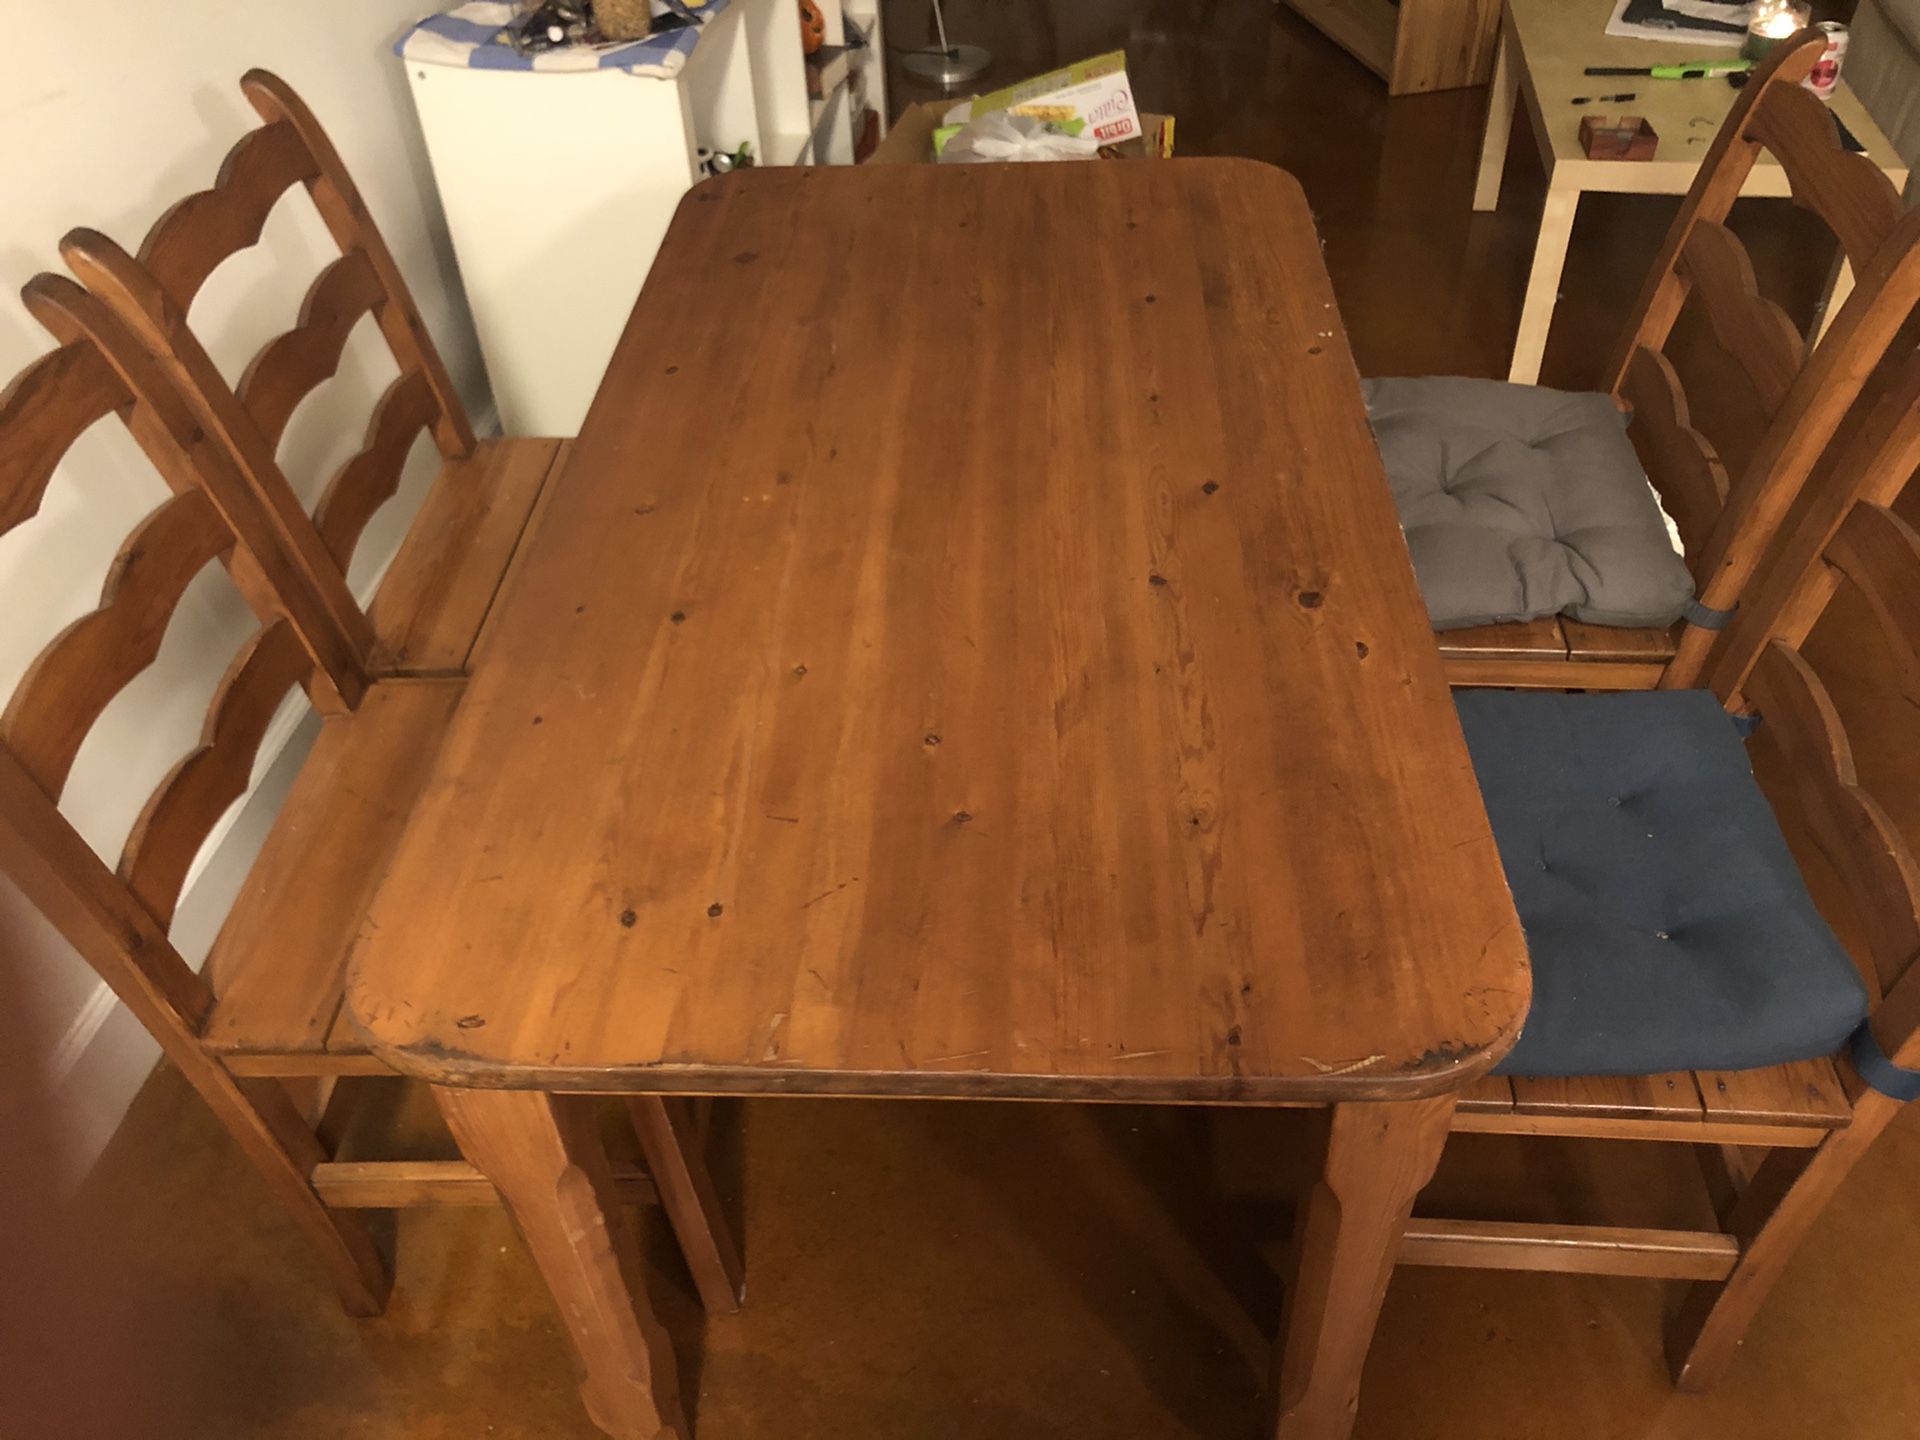 Wooden dining table and chairs